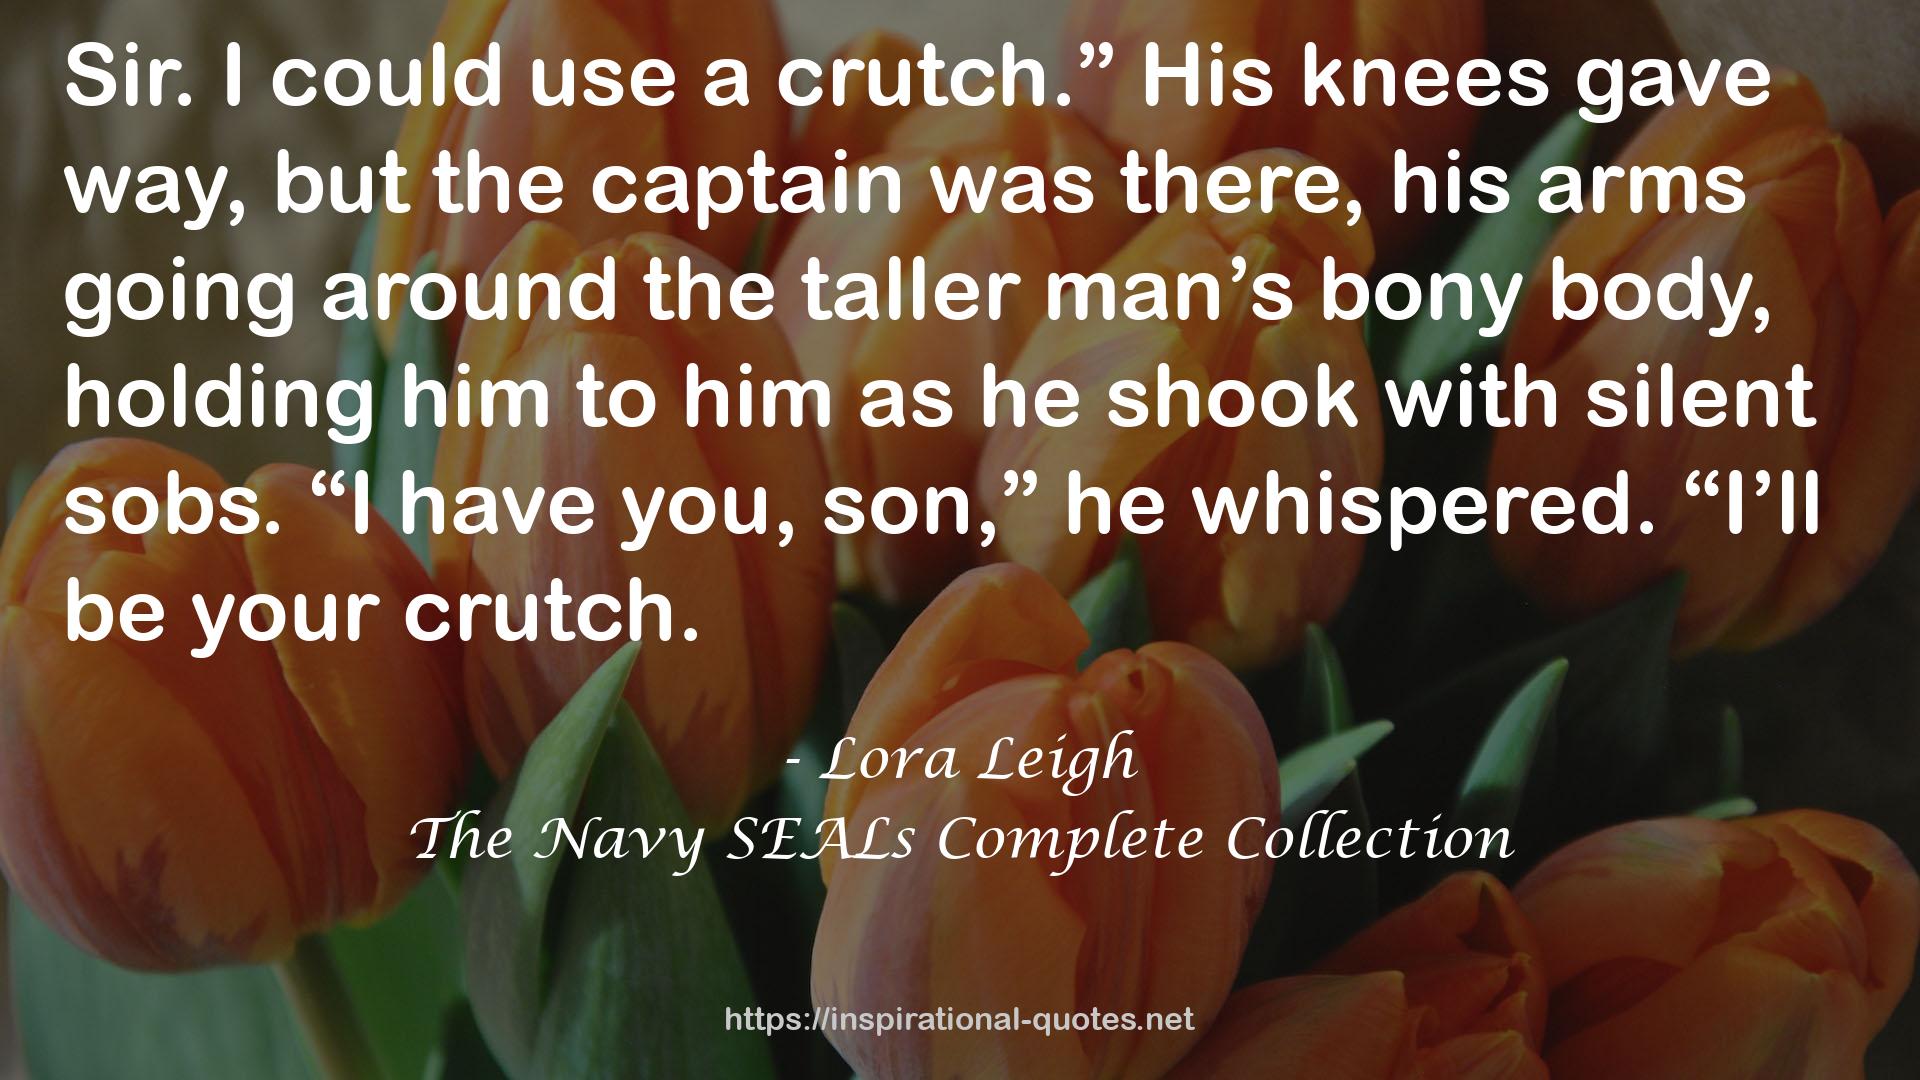 The Navy SEALs Complete Collection QUOTES